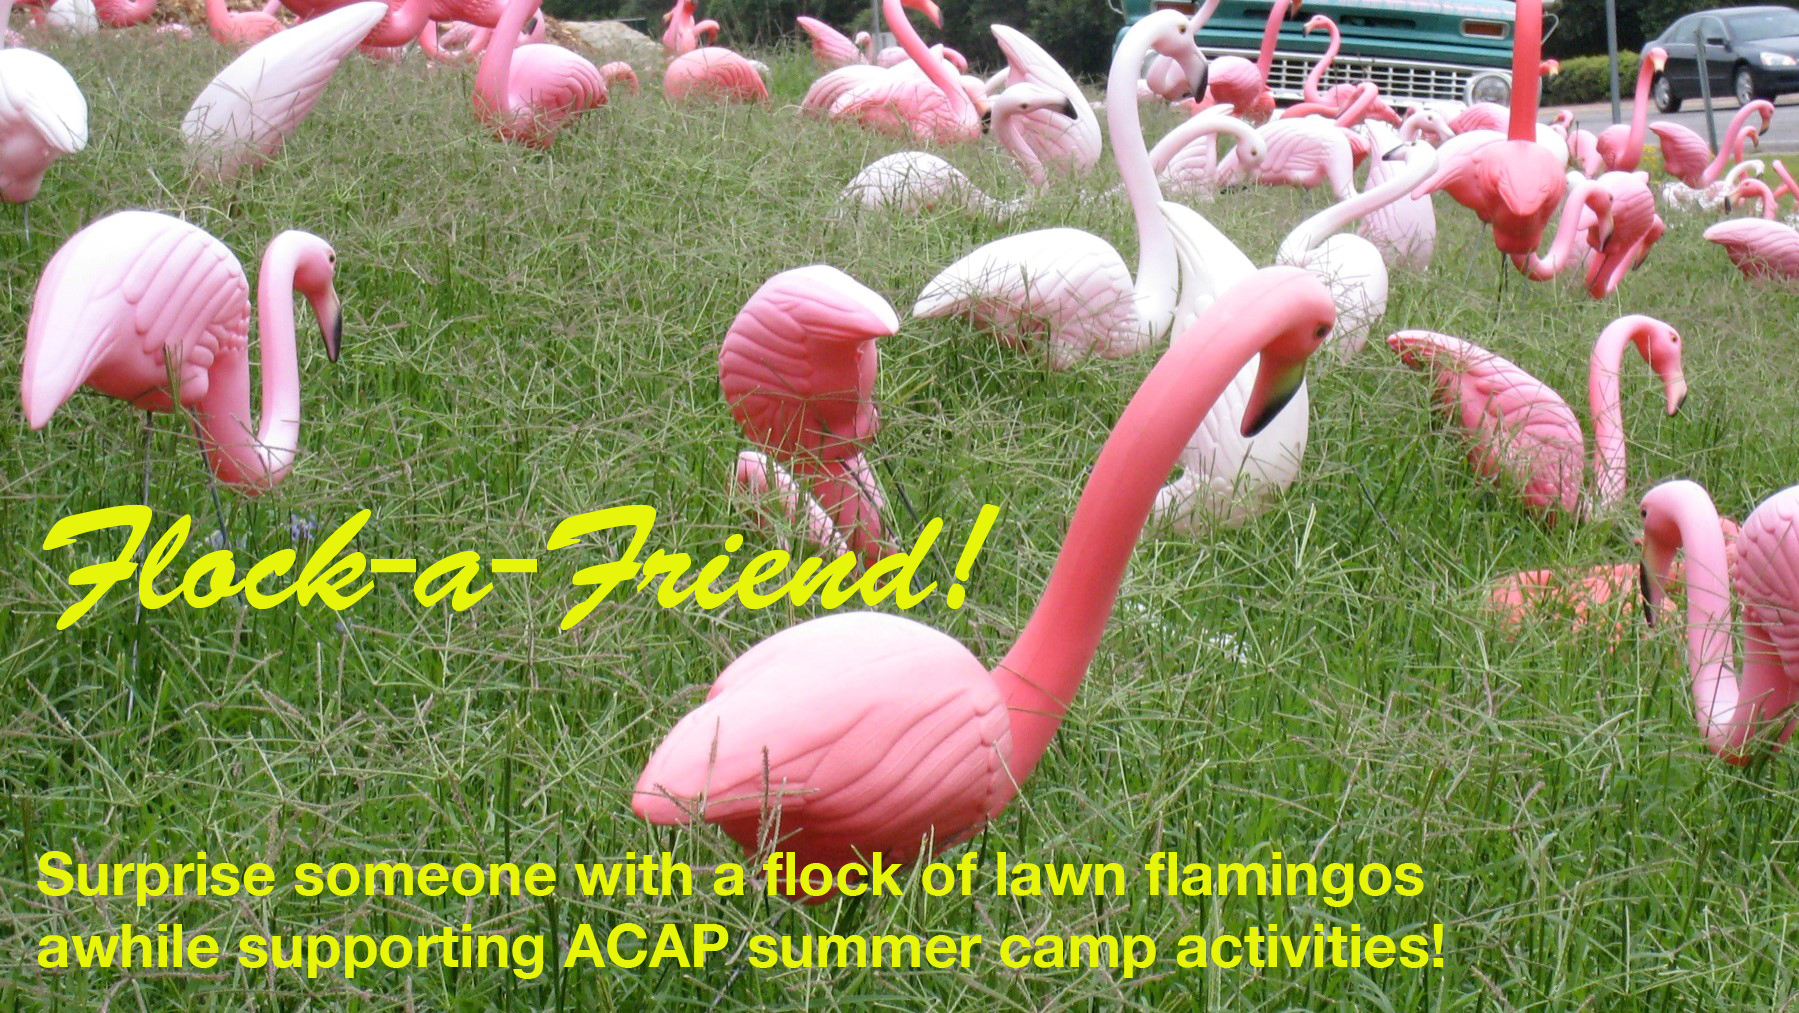 A group of plastic flamingos in a yard